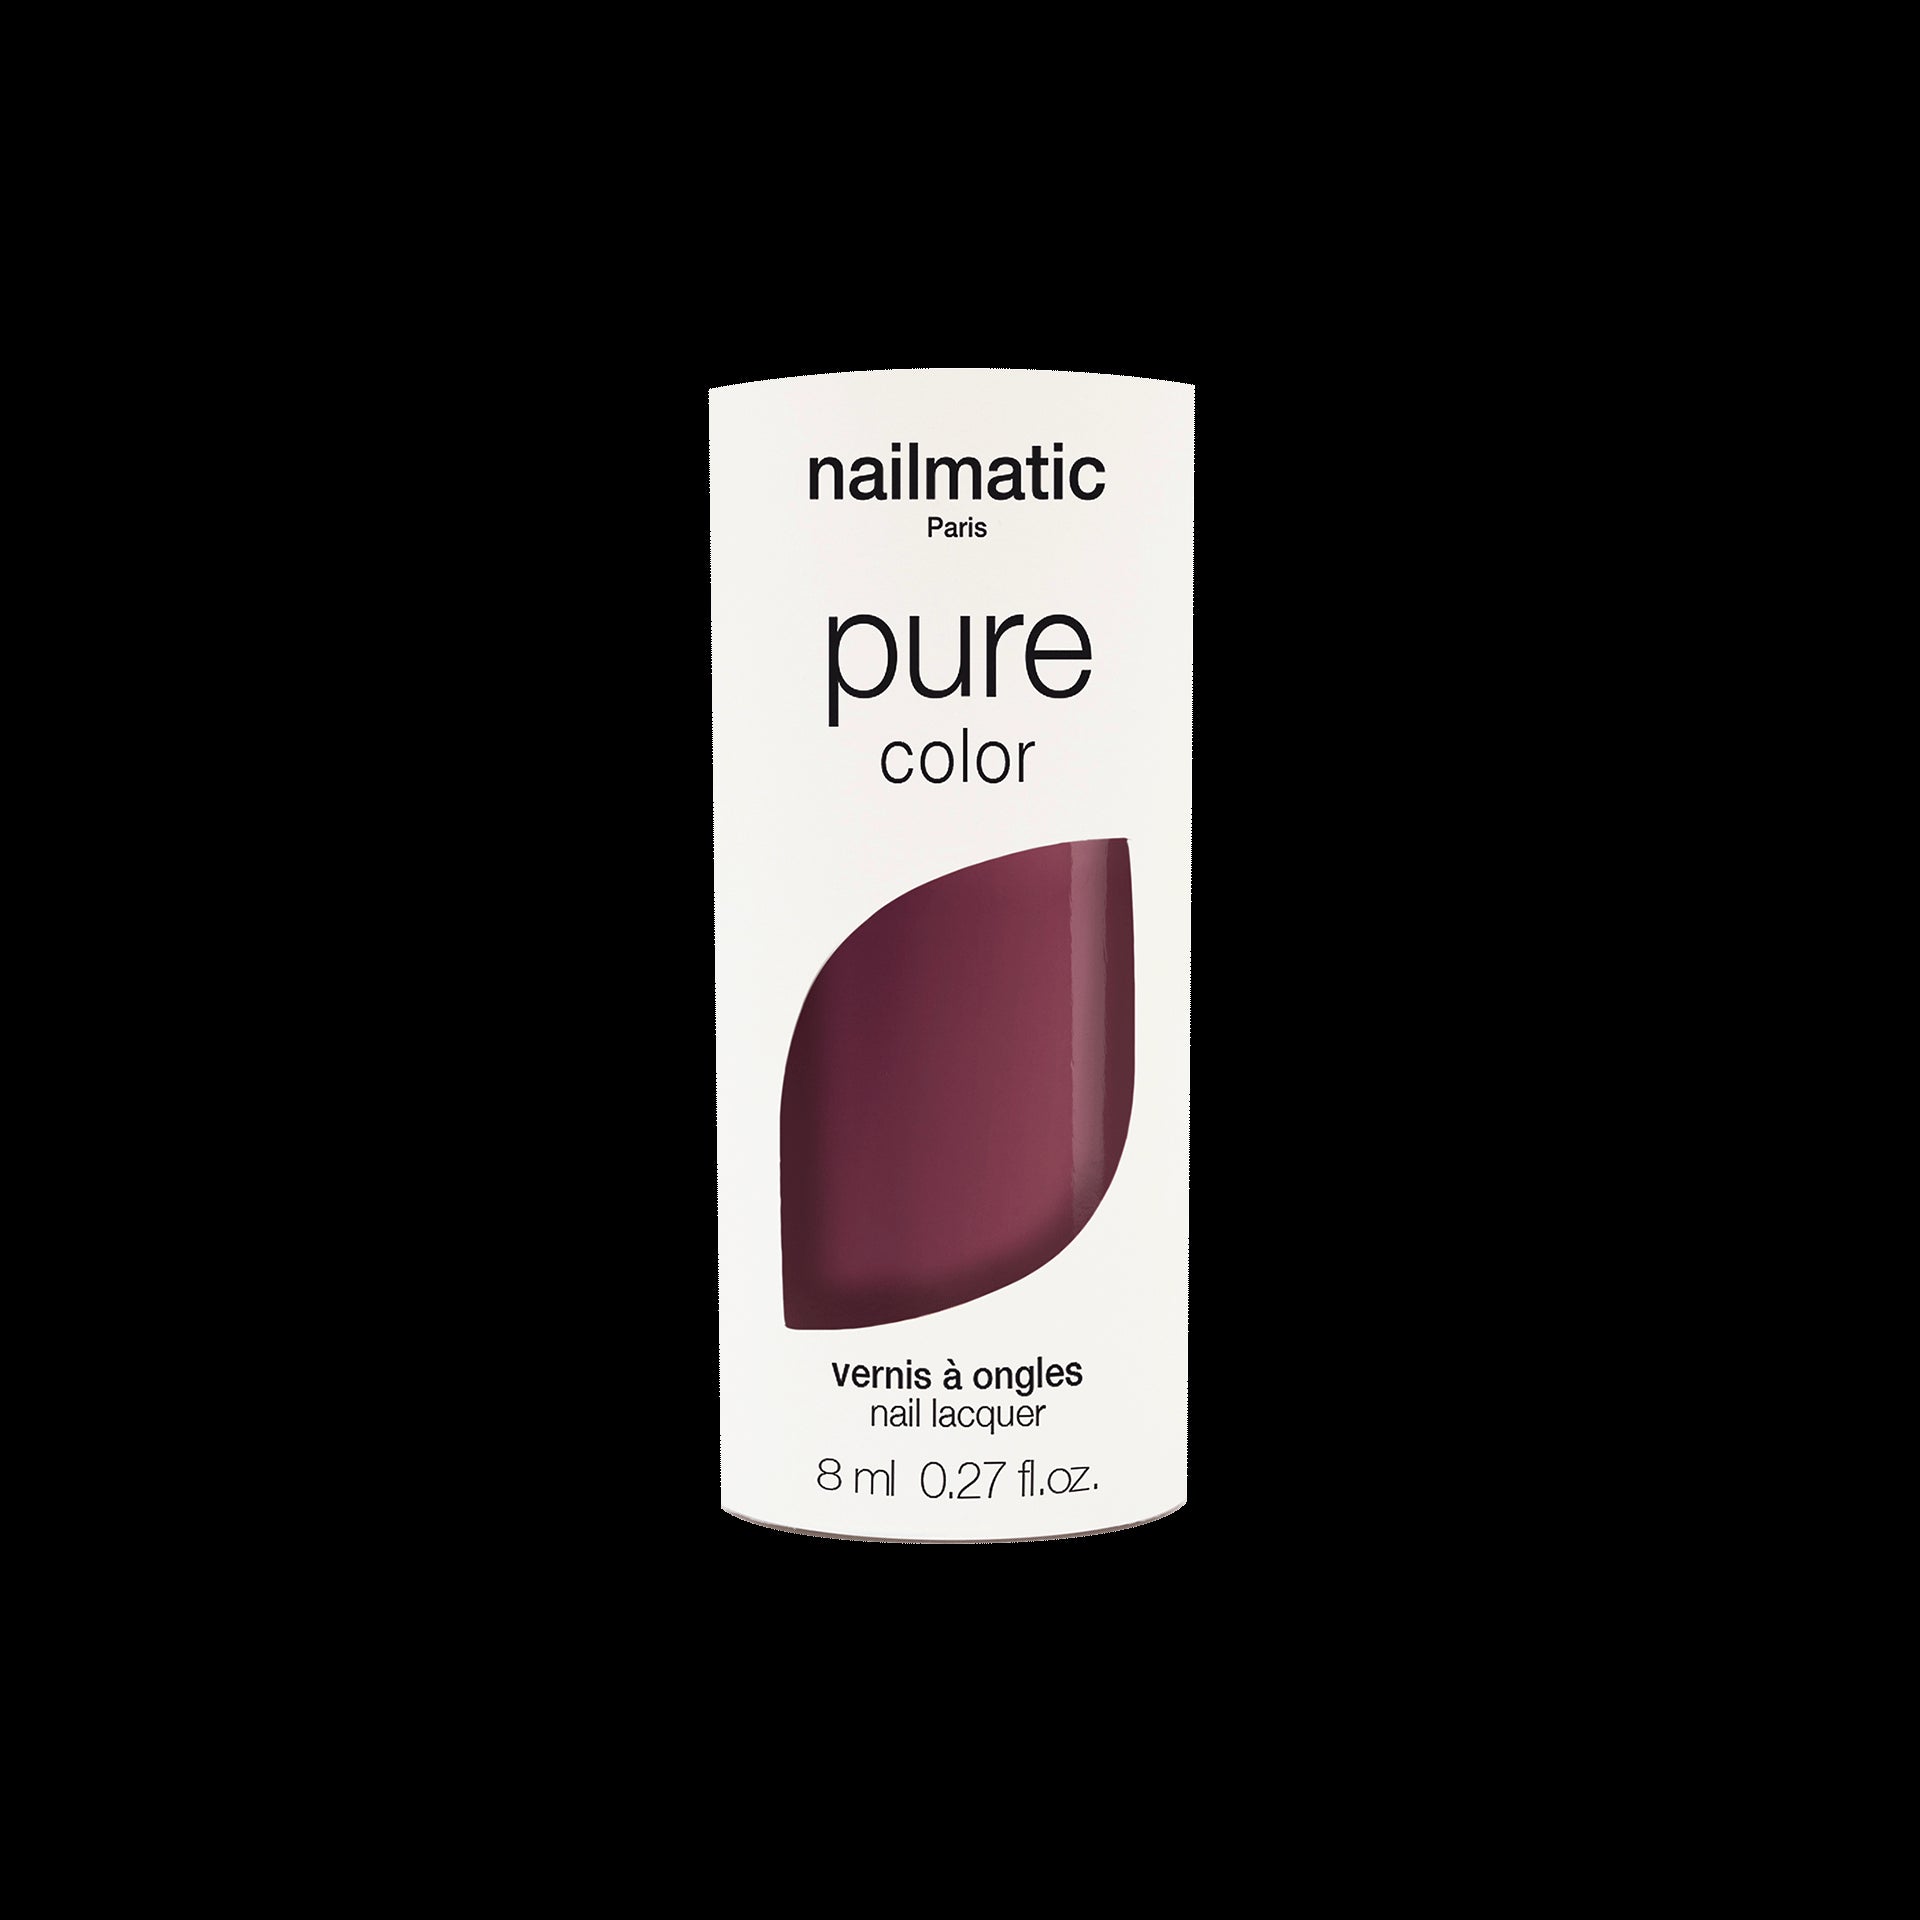 plum brown nail polish misha pure color with packaging